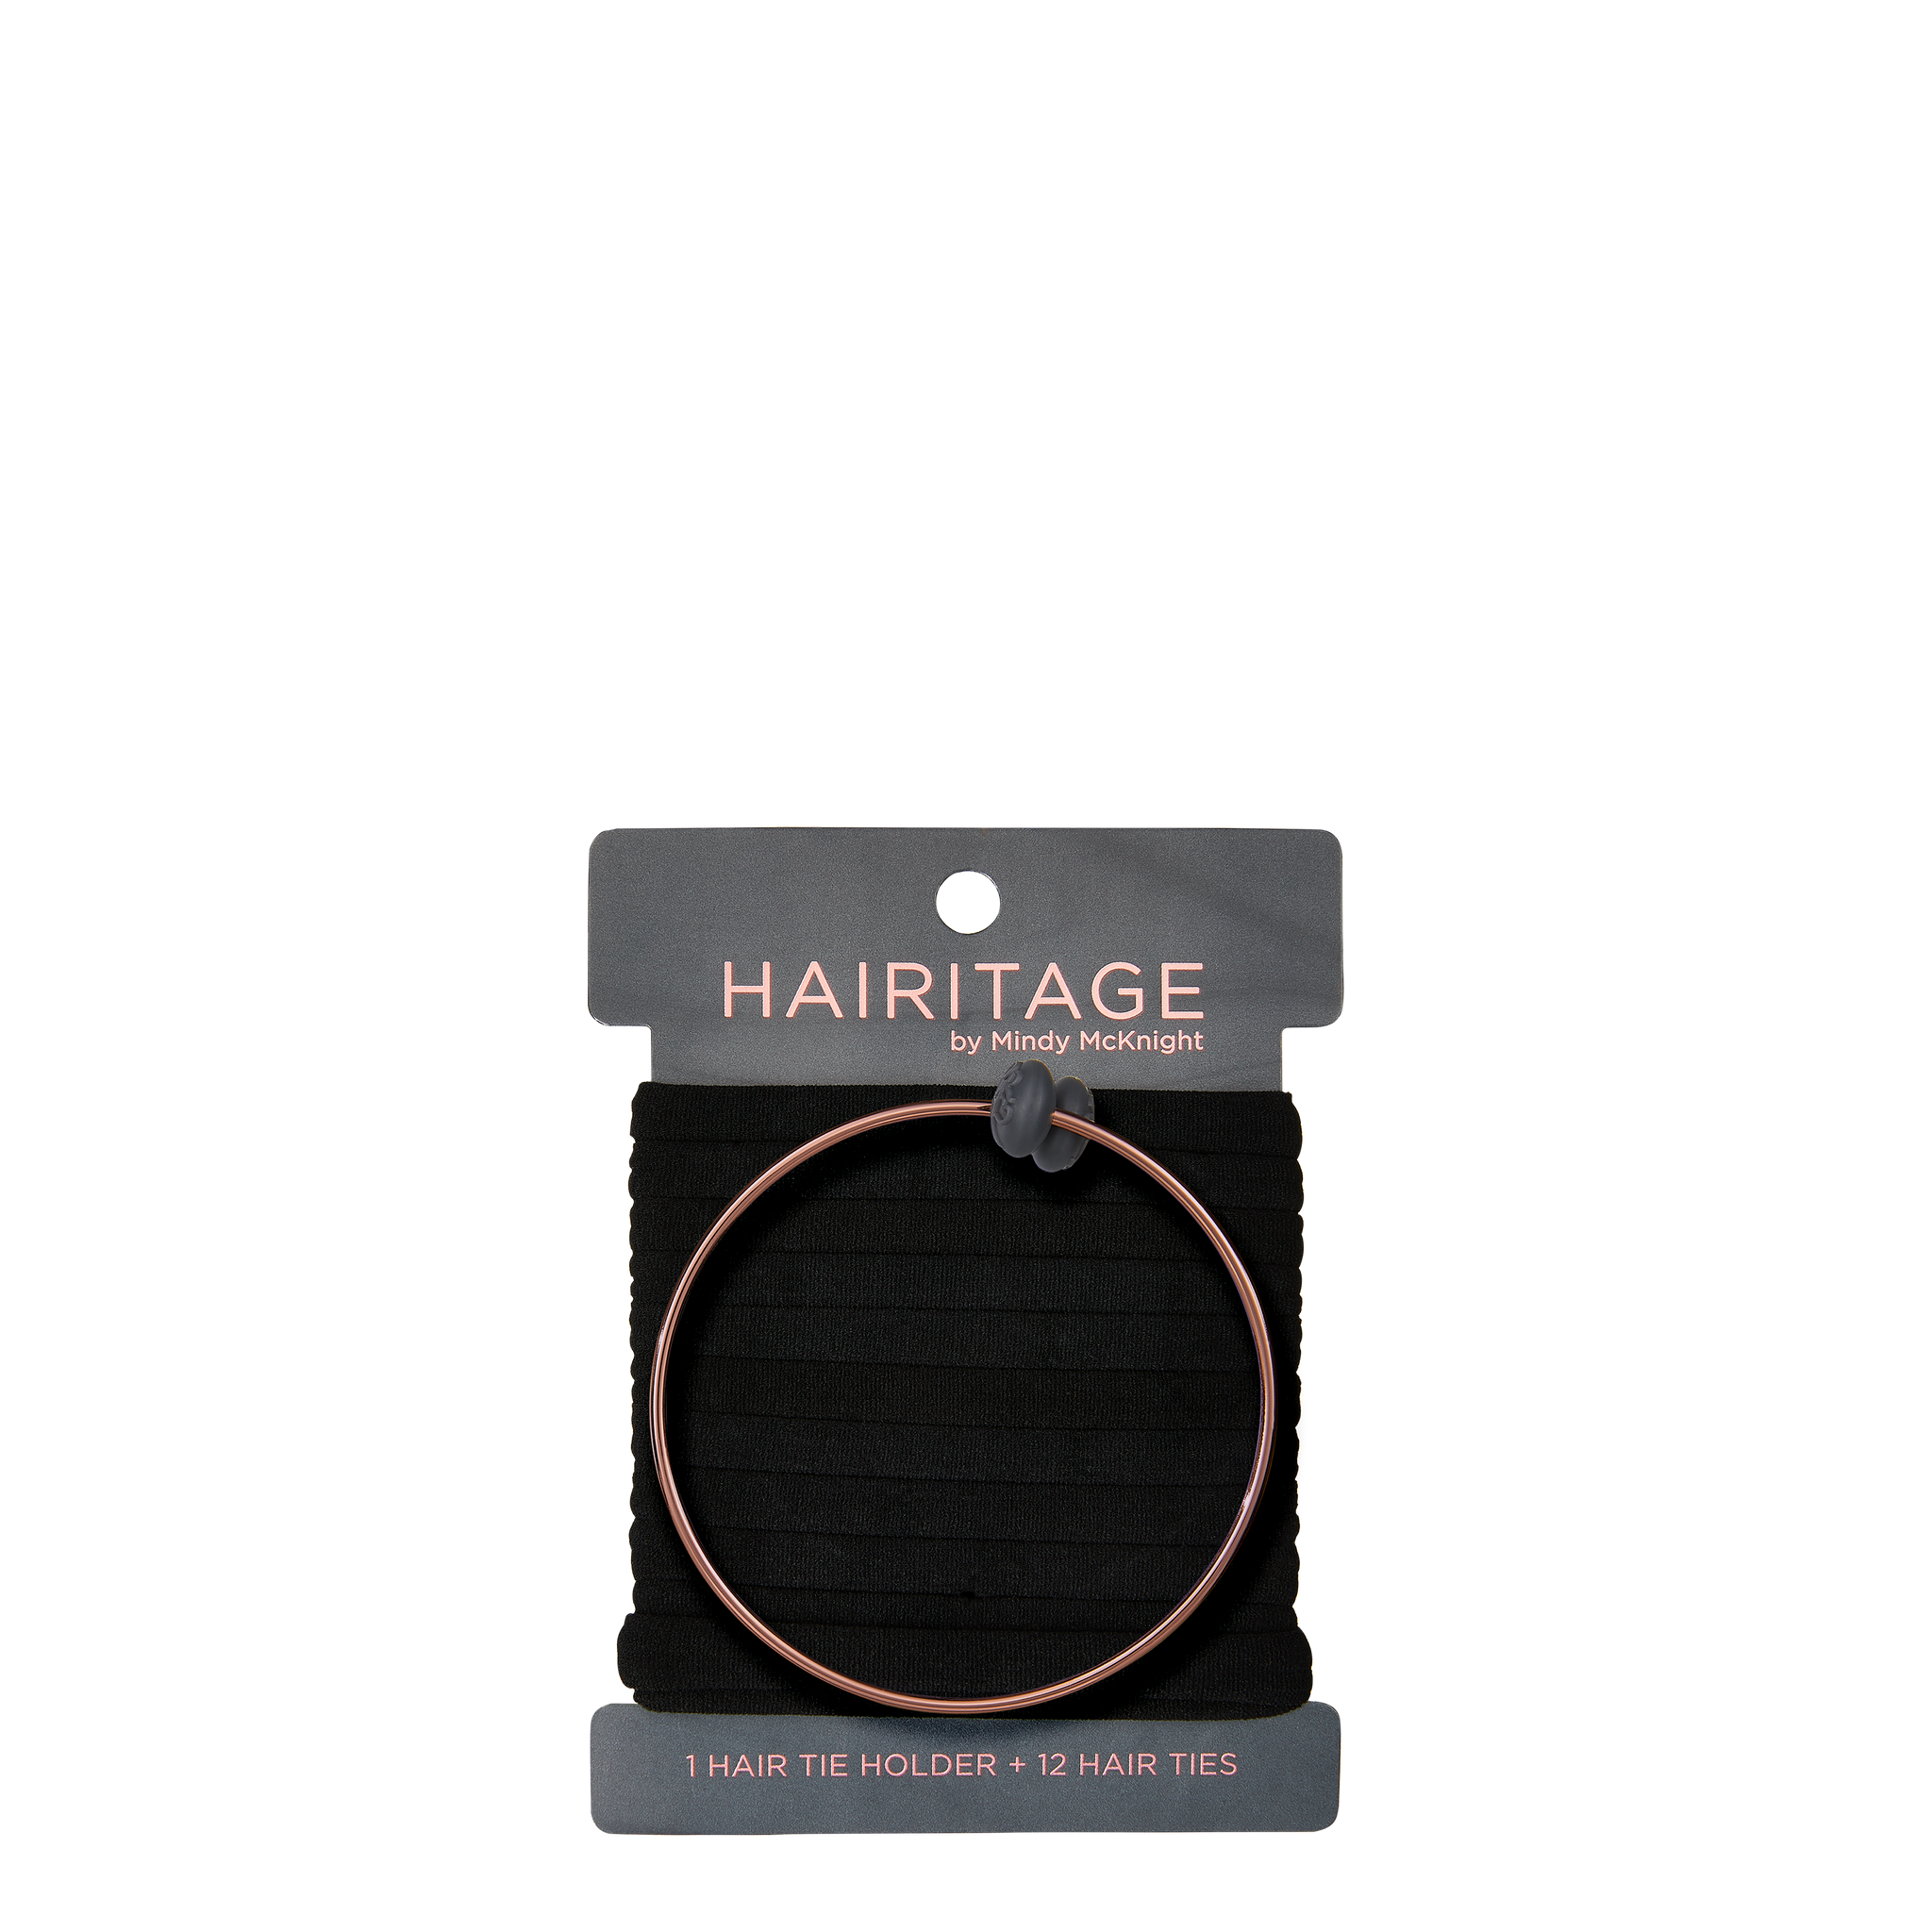 Better Together Hair Tie Holder + Hair Ties – Hairitage by Mindy